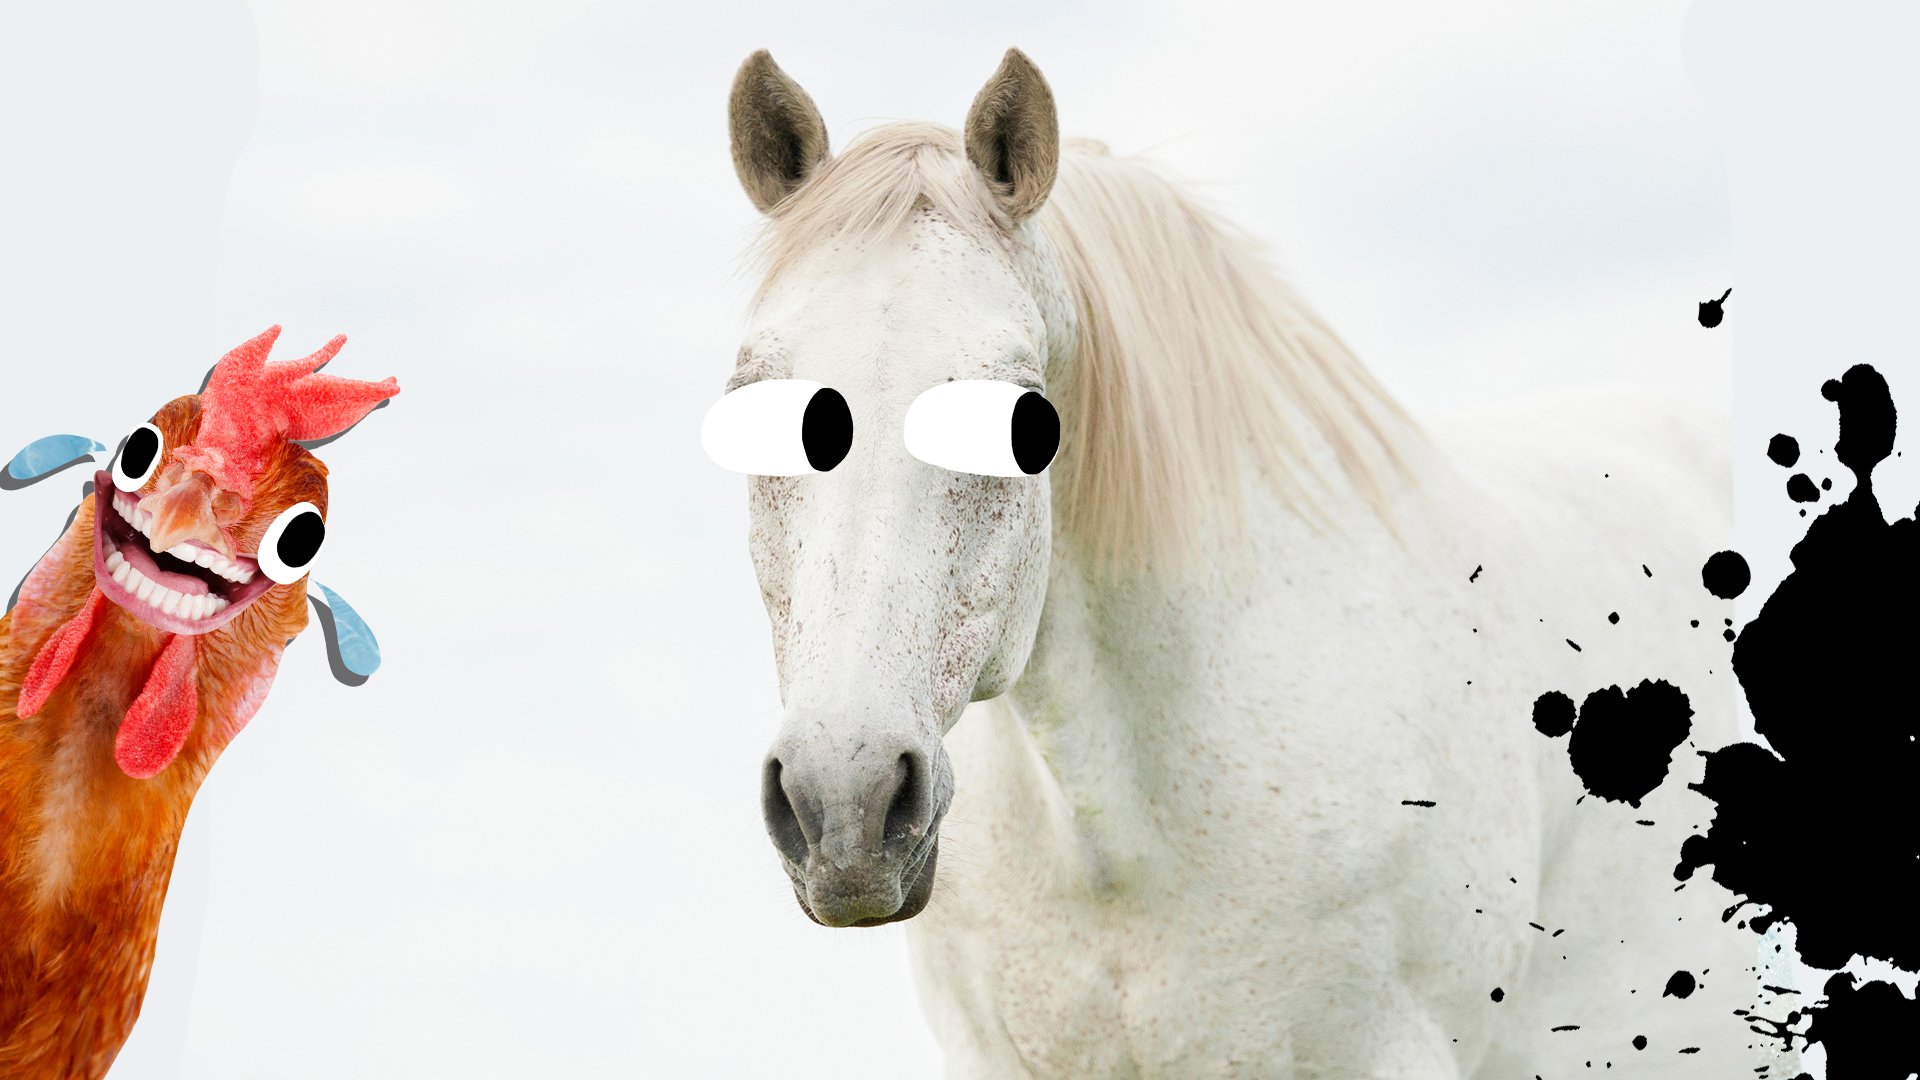 A confused white horse